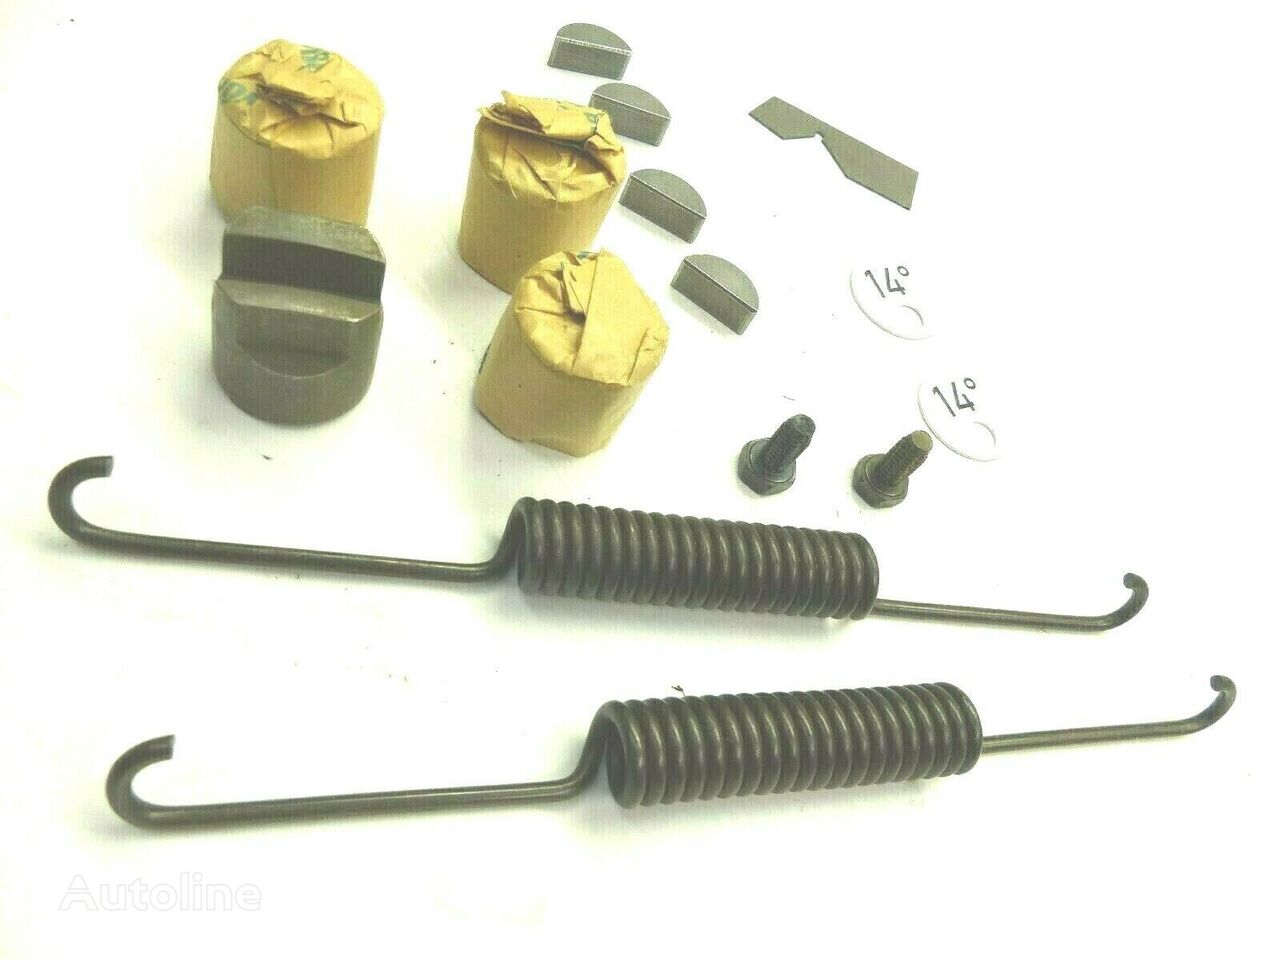 IVECO 1908824 repair kit for IVECO Daily truck